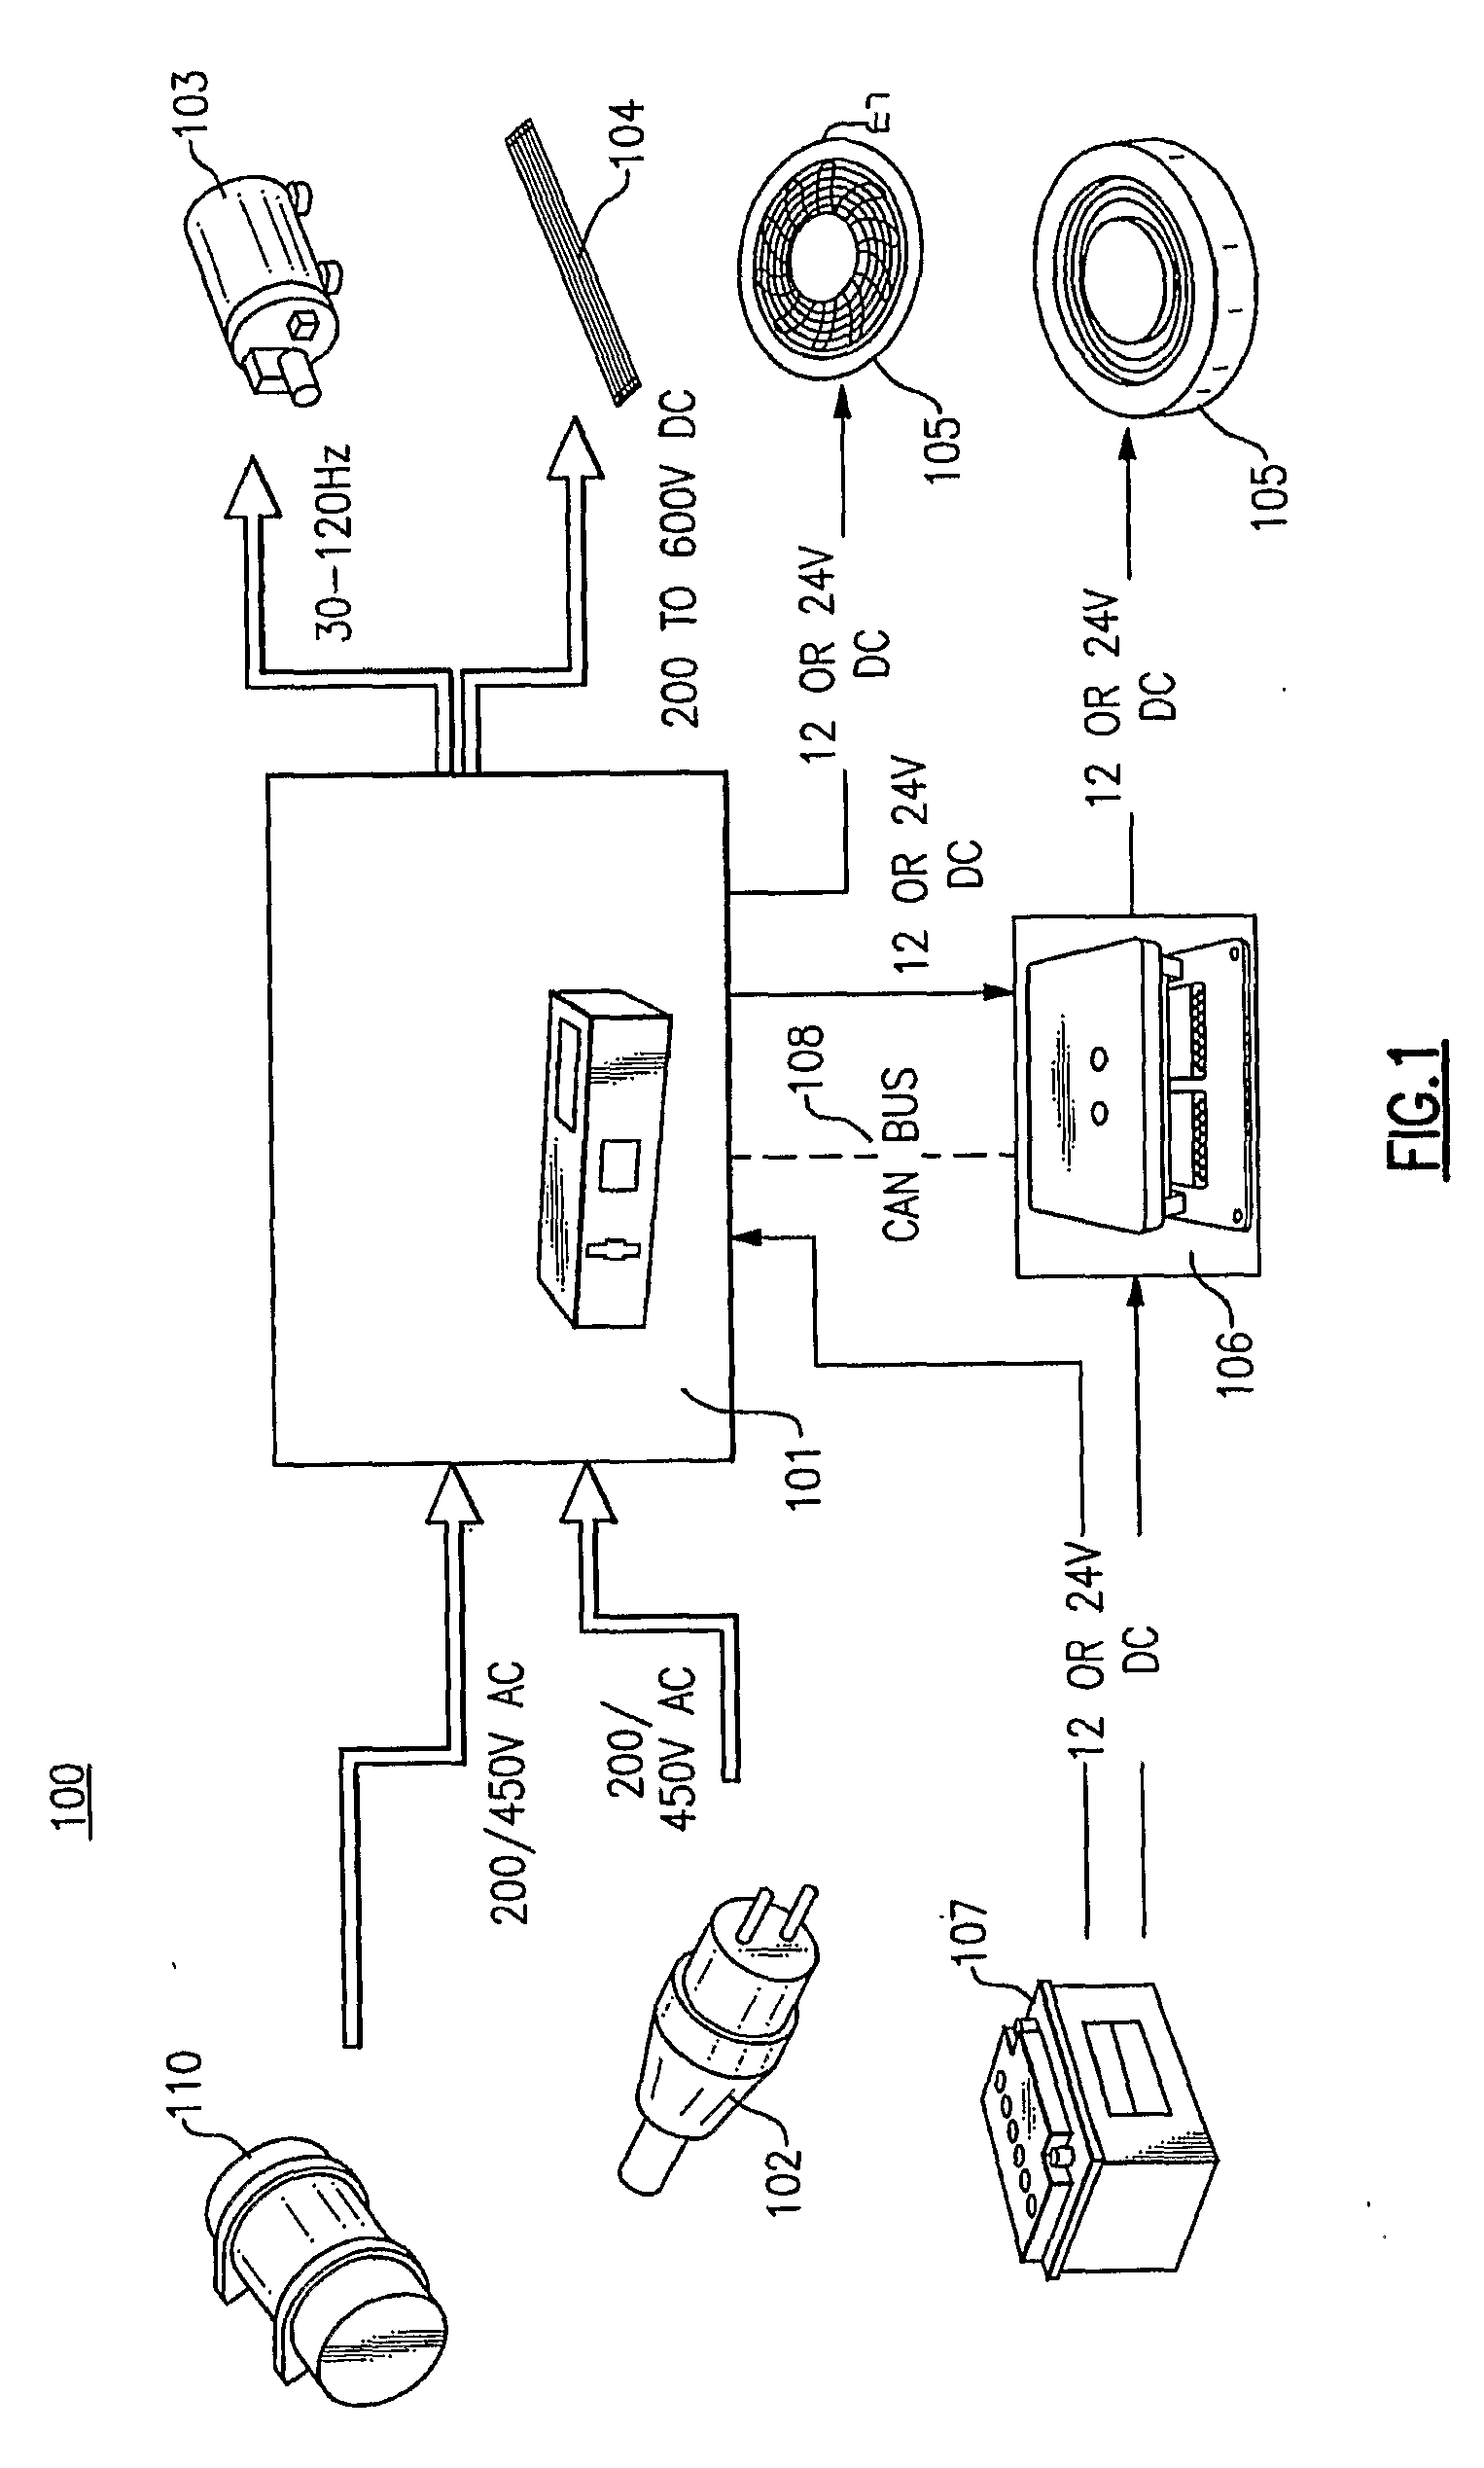 Integrated multiple power conversion system for transport refrigeration units